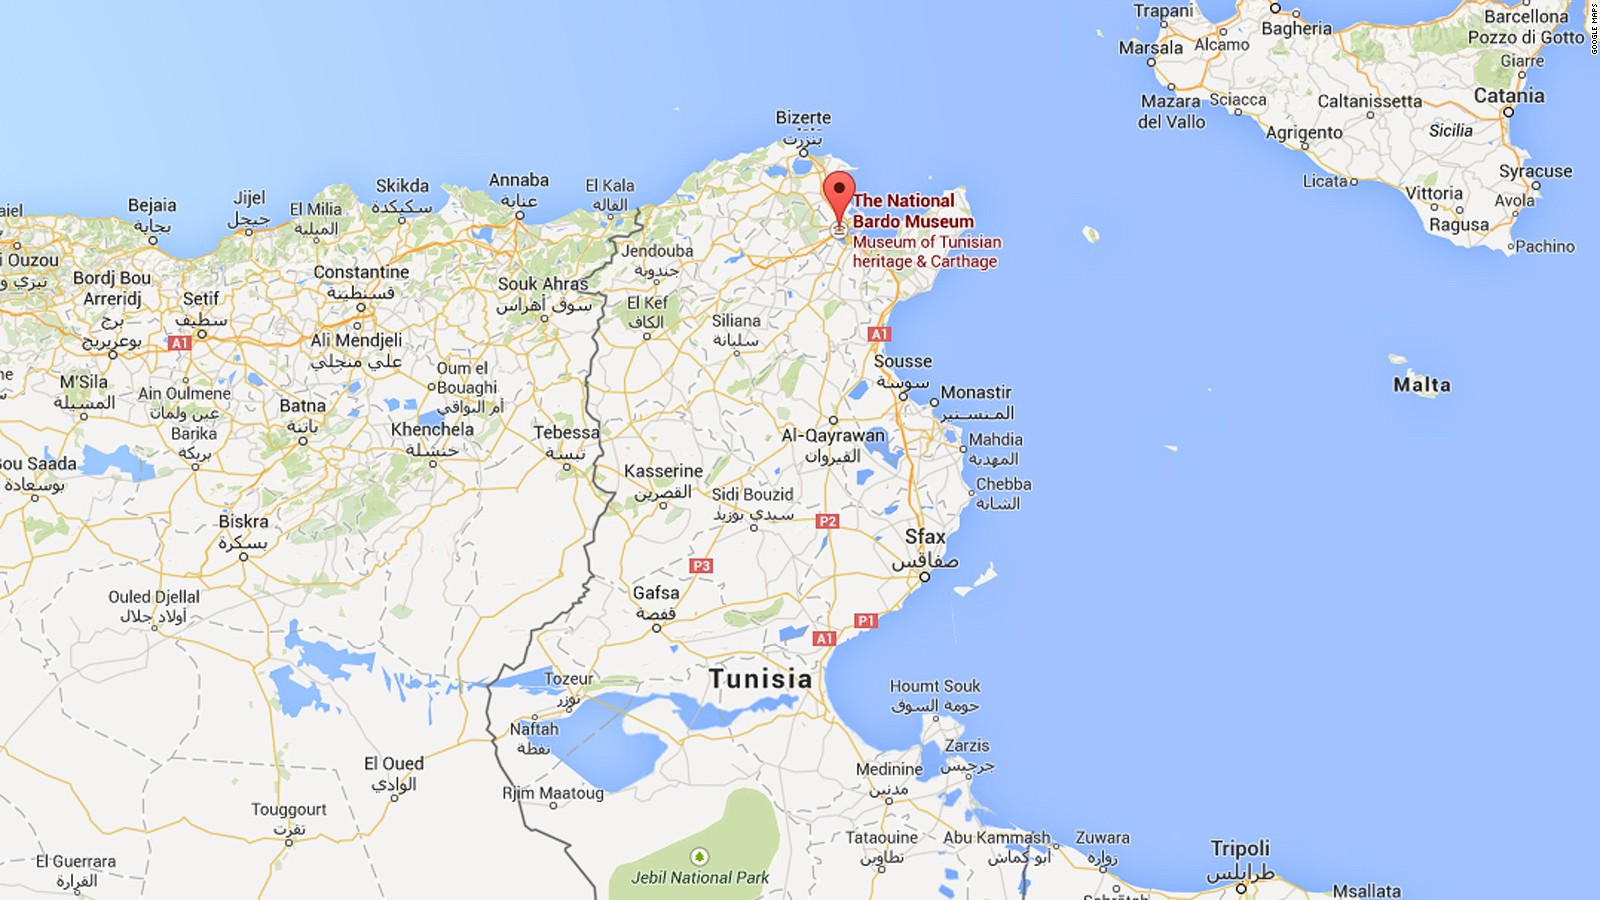 Tunisia museum attack: At least 19 killed, 3 at large - CNN